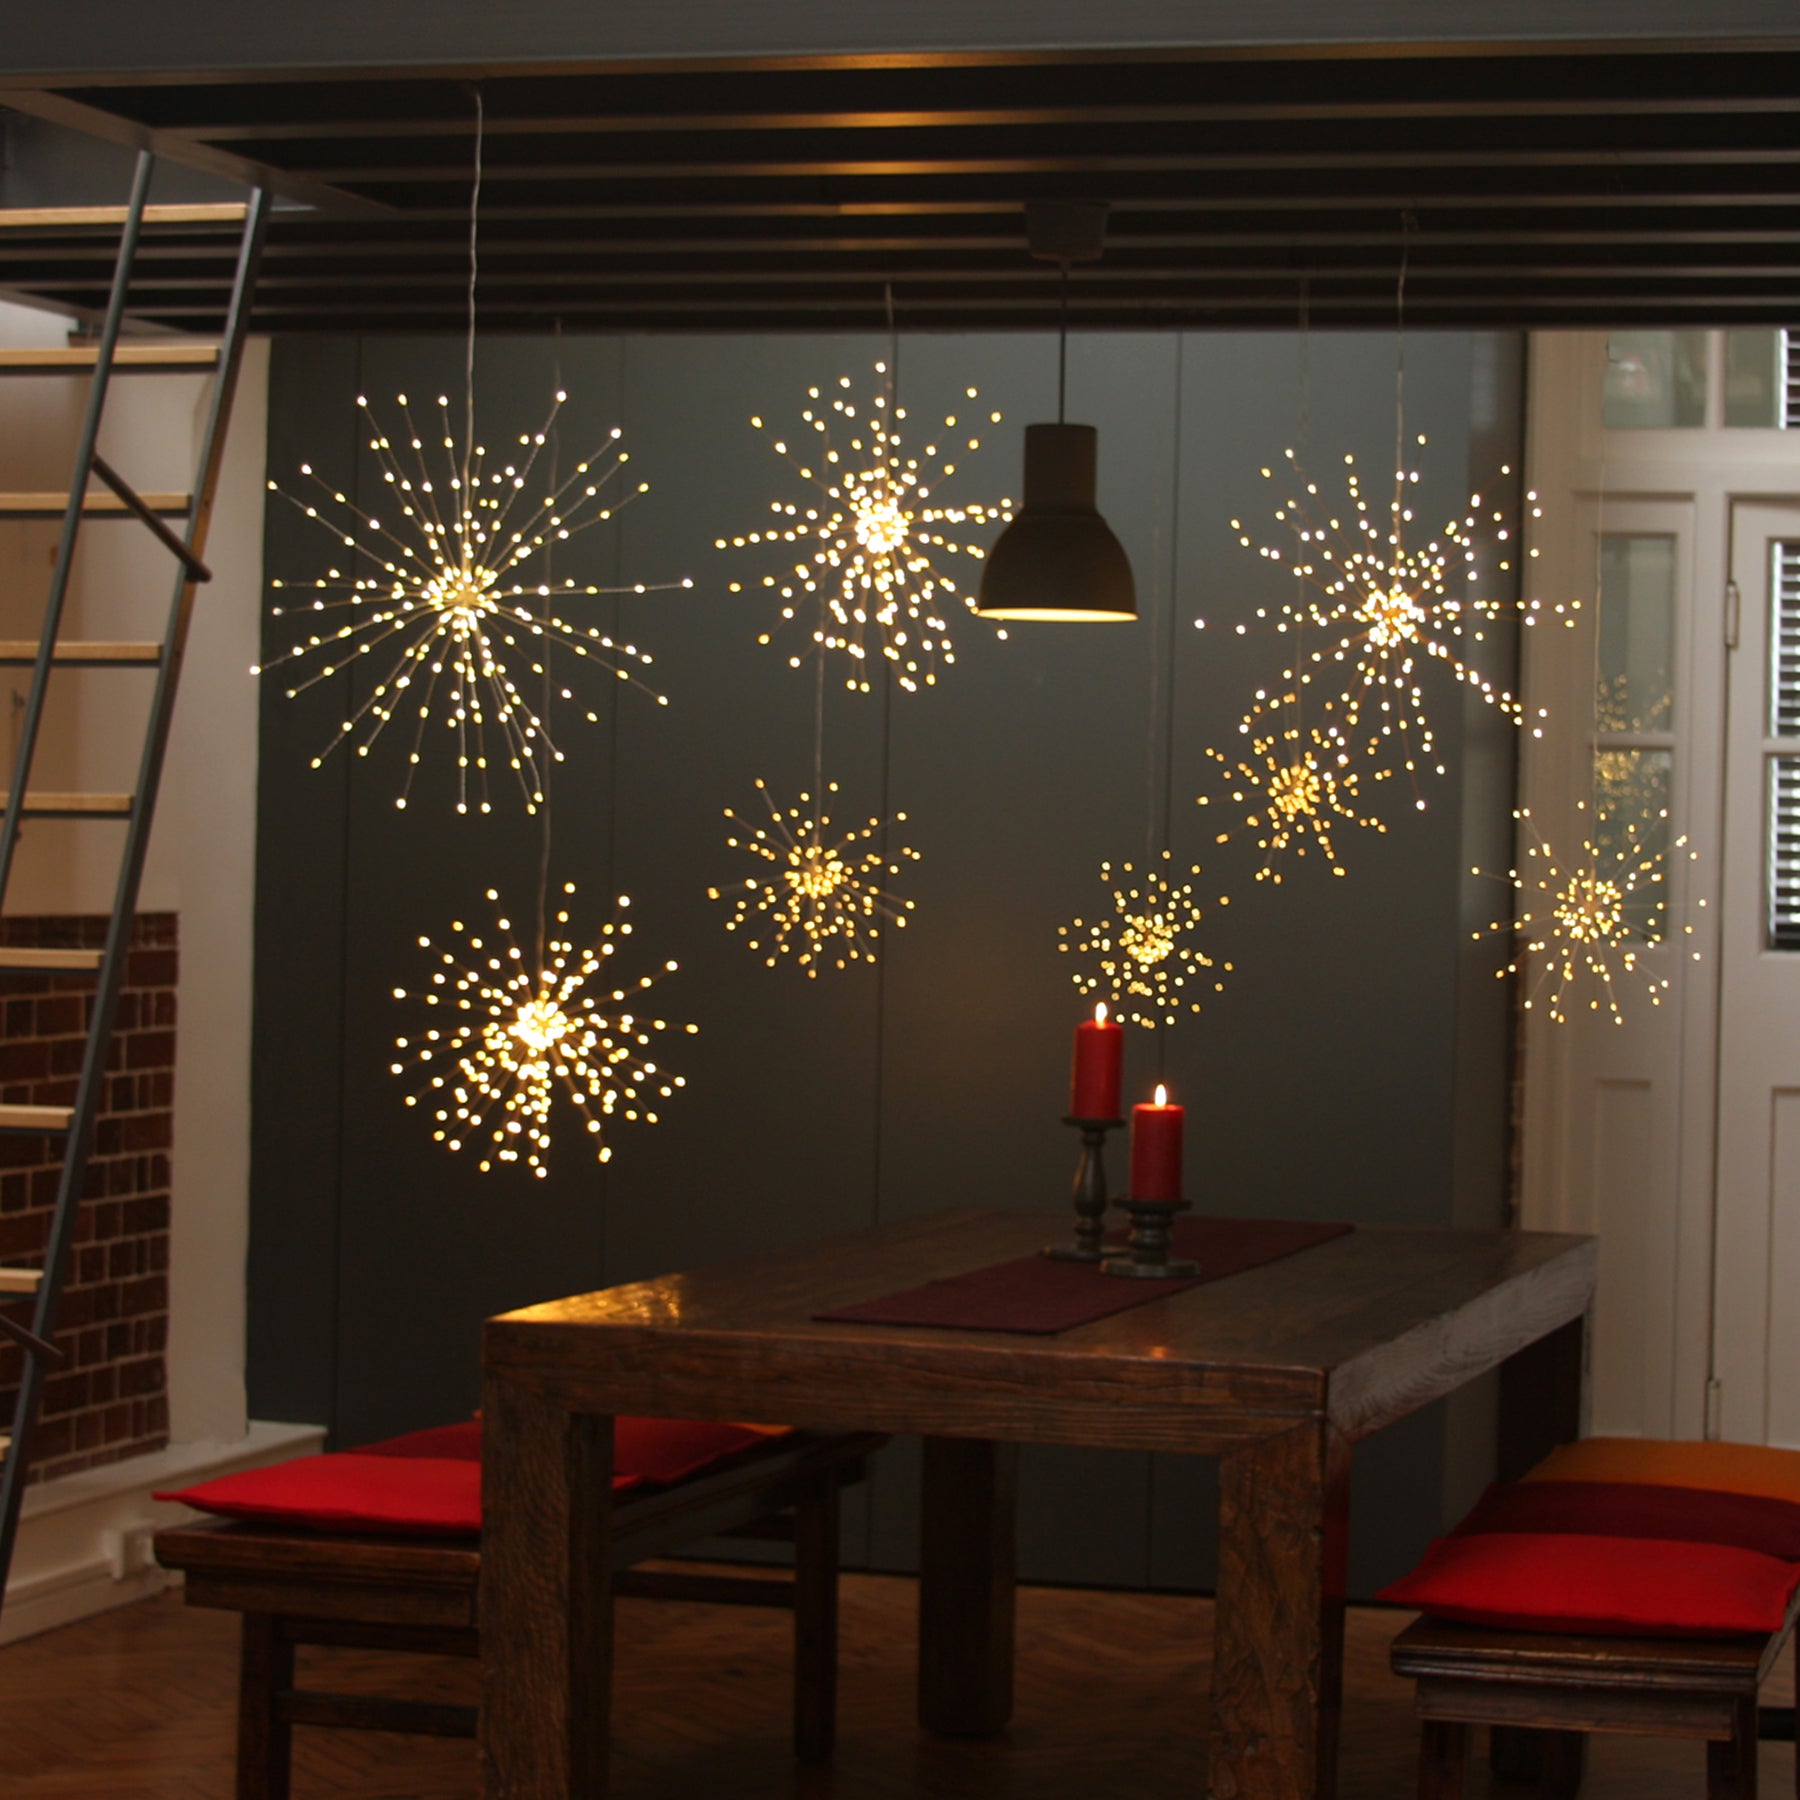 Starburst unusual decorative lighting for the home